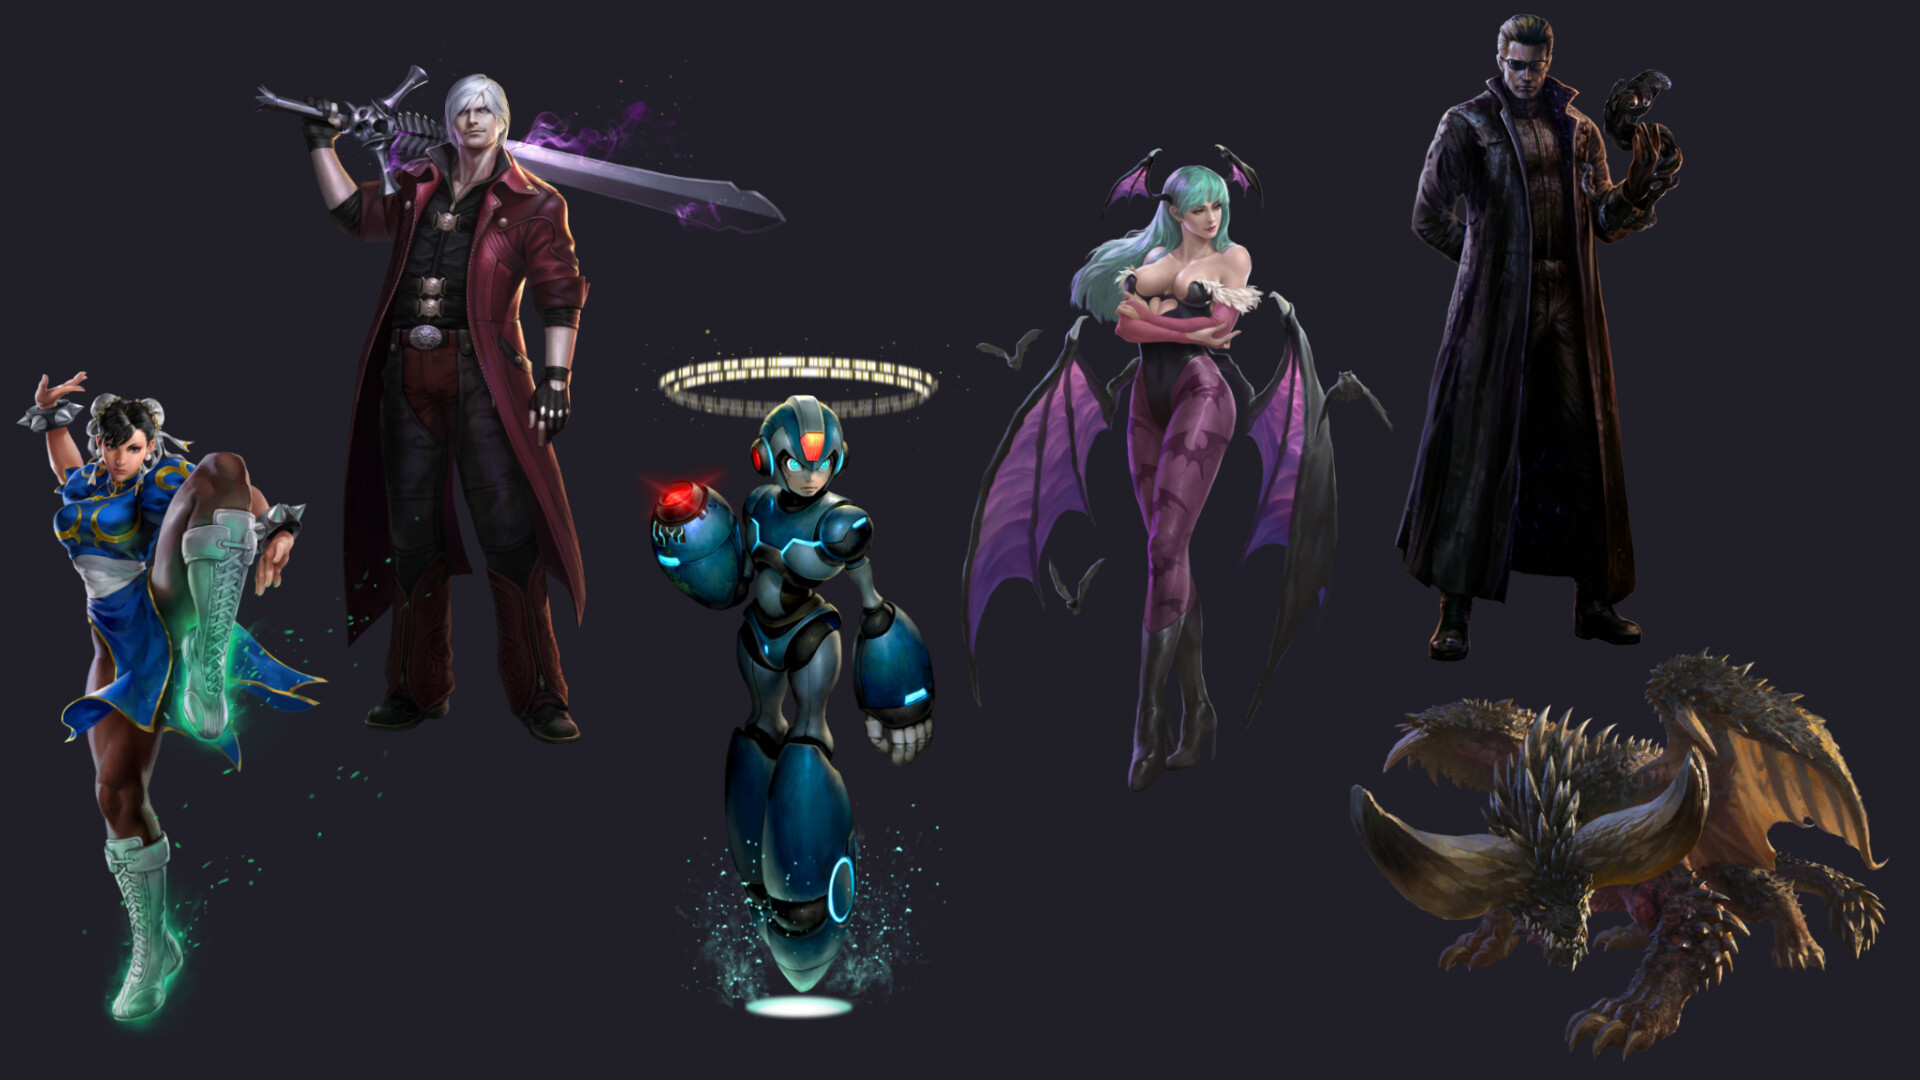 PlayTEPPEN on Twitter  VERGIL WALLPAPER PACK 2  We have more Vergil  ᴡᴀʟʟᴘᴀᴘᴇʀs for you Which one is your favorite   TEPPEN  DevilMayCry DMC  httpstcoCp9TcOQYVl  X